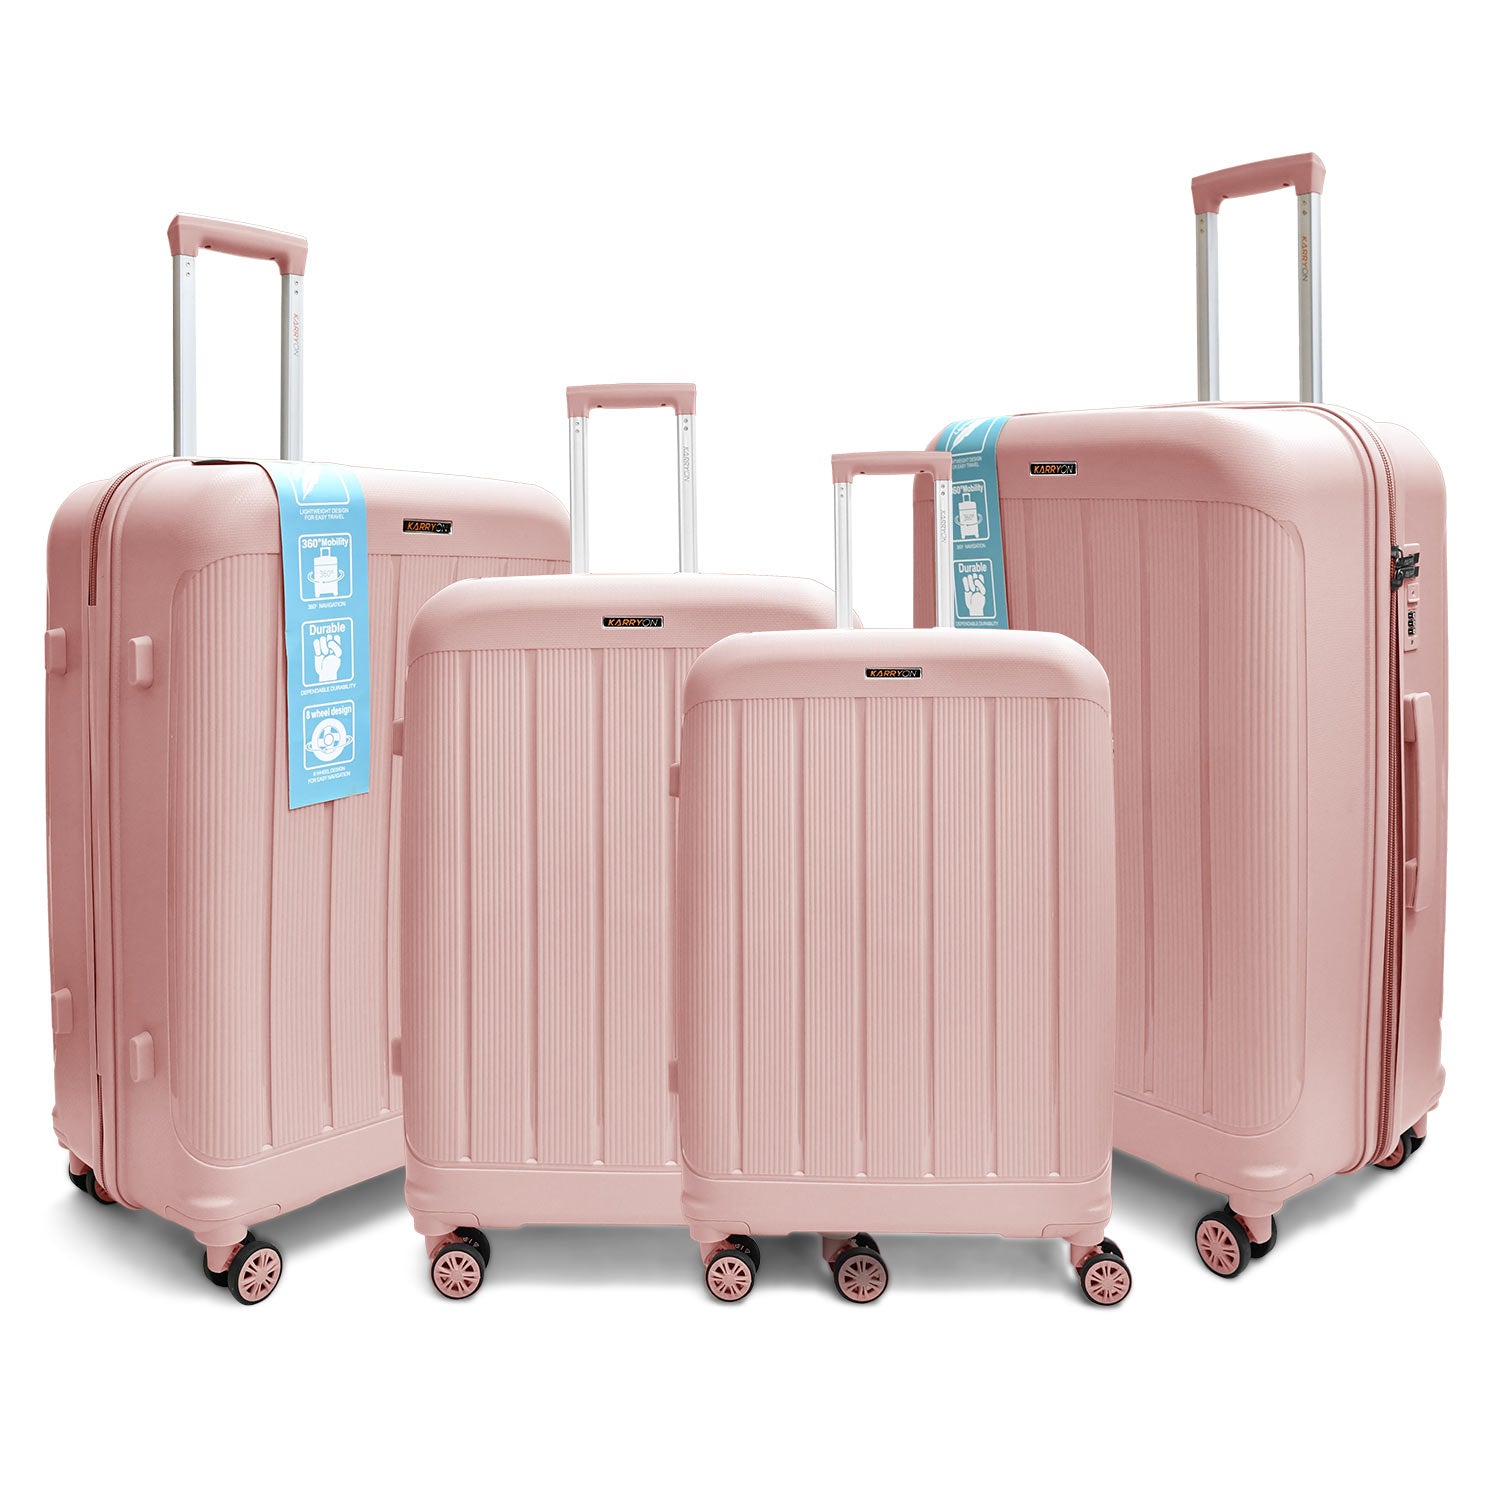 KARRY-ON MONUMENT 4 PC SET PP LUGGAGE (20/24/28/32")